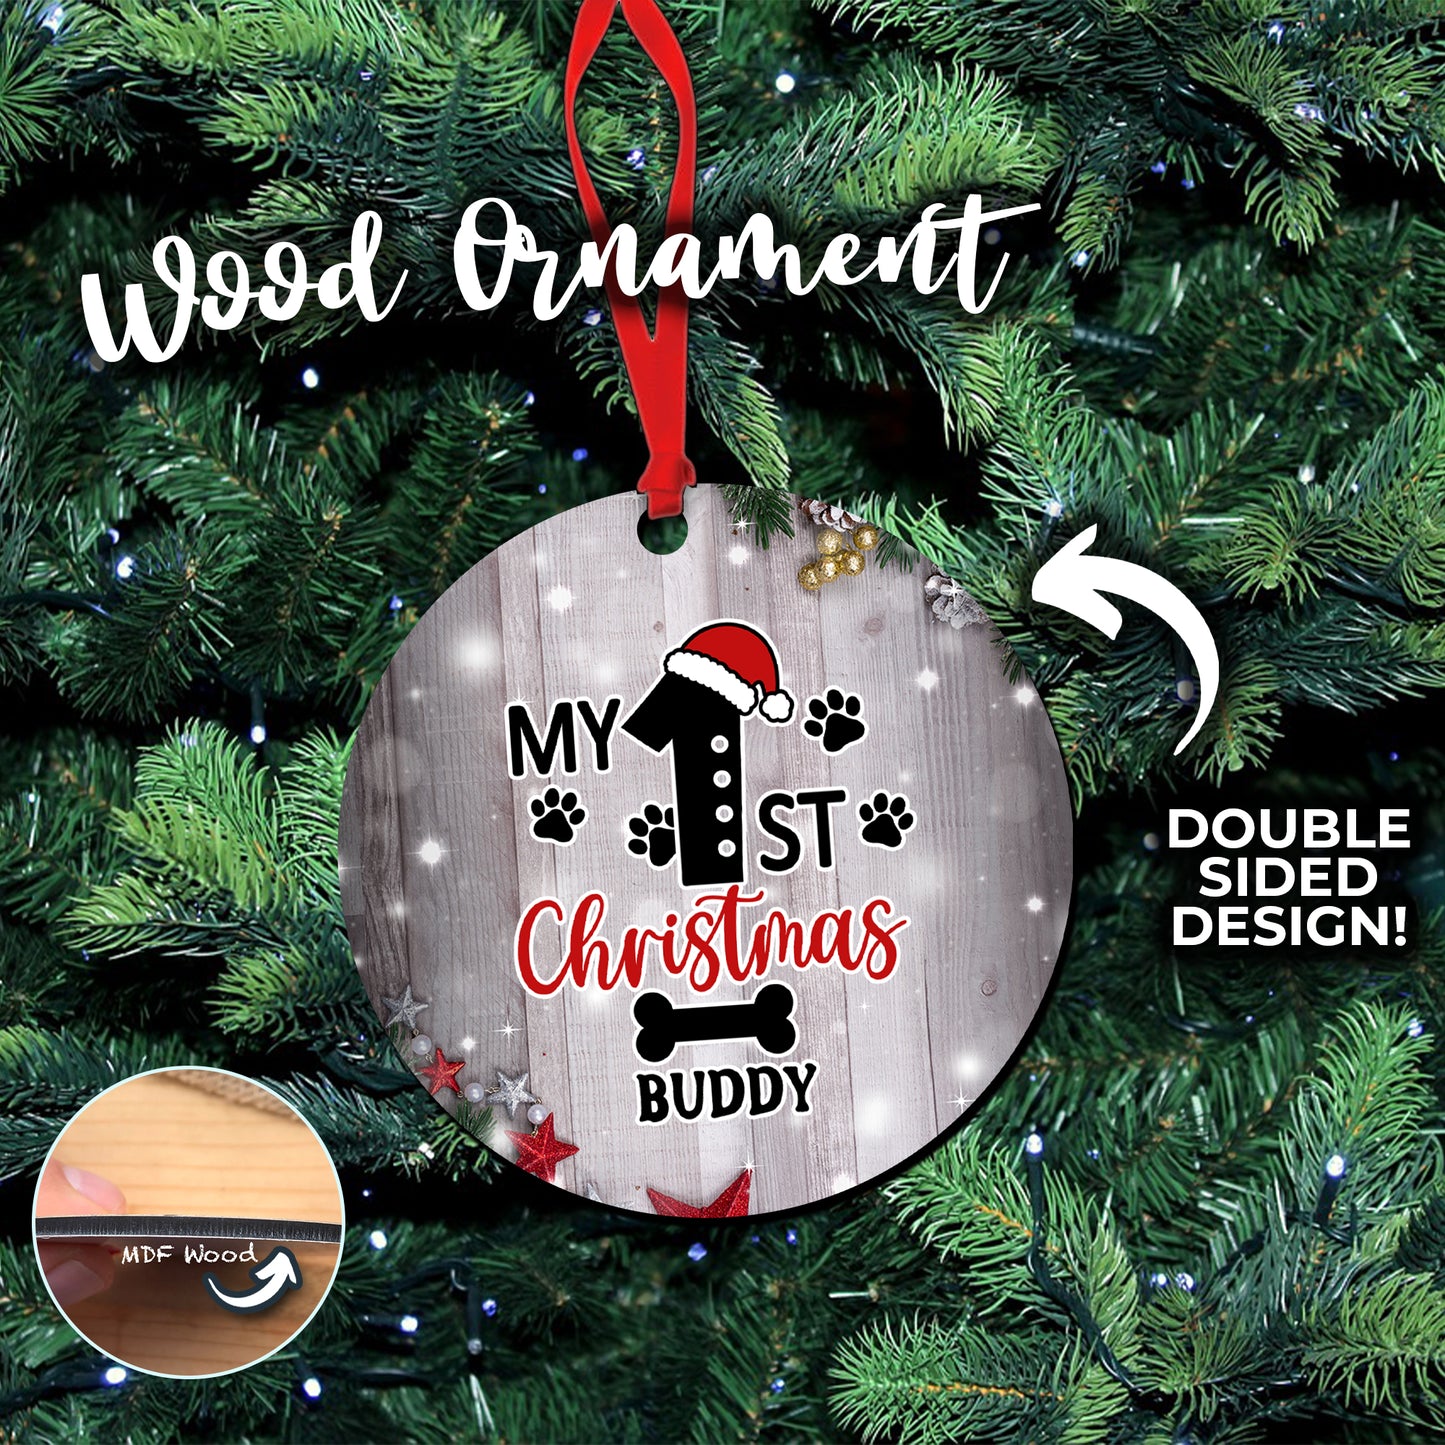 My 1st Christmas - Pet Ornament with Pet Name - Double Sided Wooden Ornament